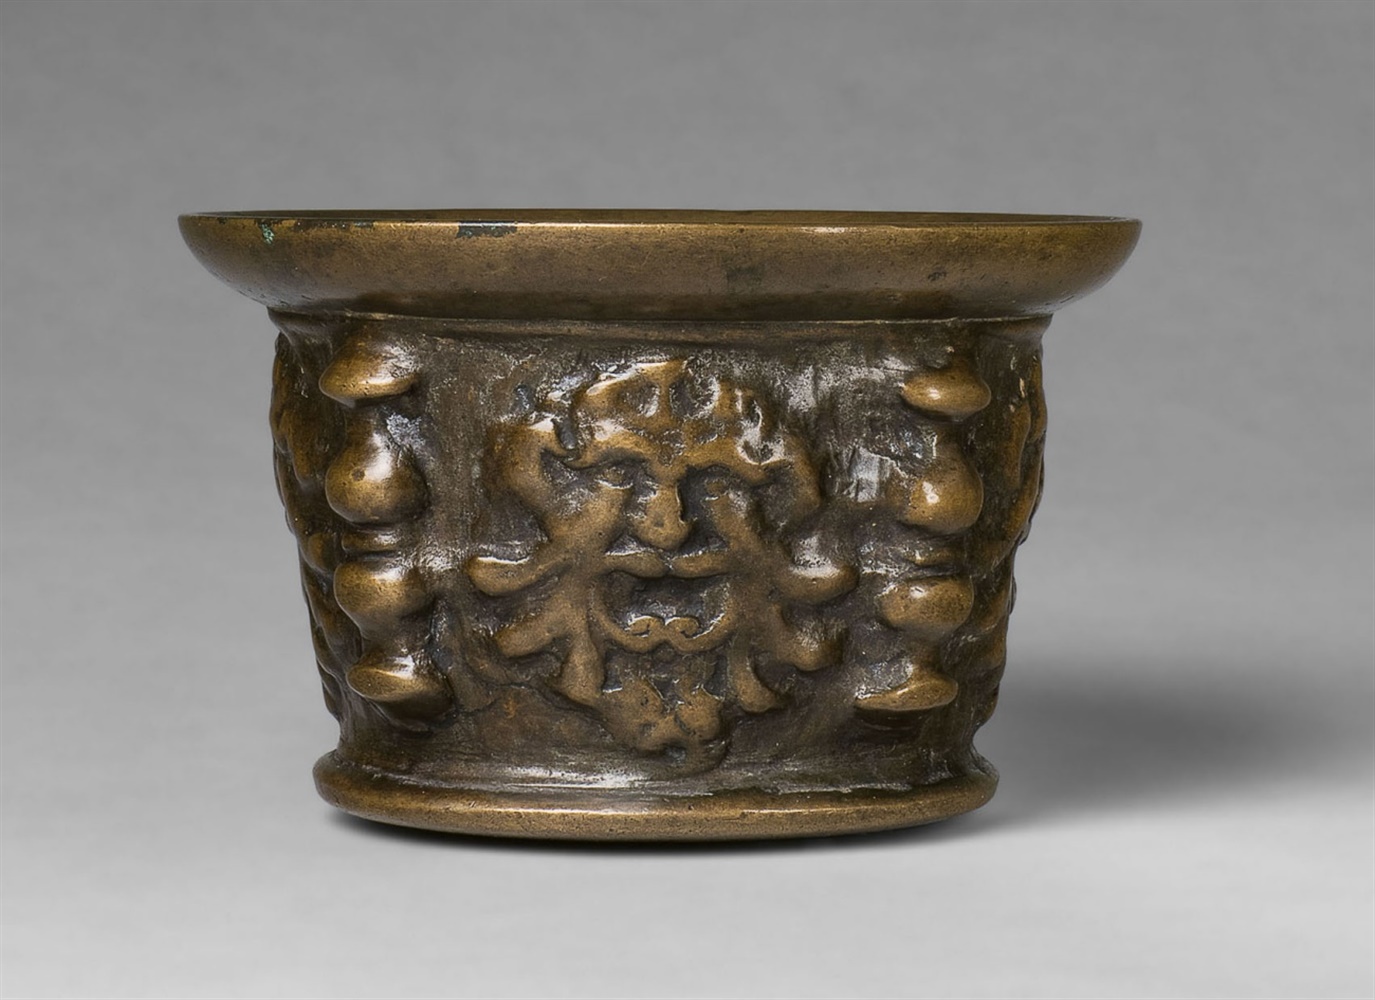 A mortar with mascaron decorThick cast bronze with natural patina. Of squat, tapering form with a